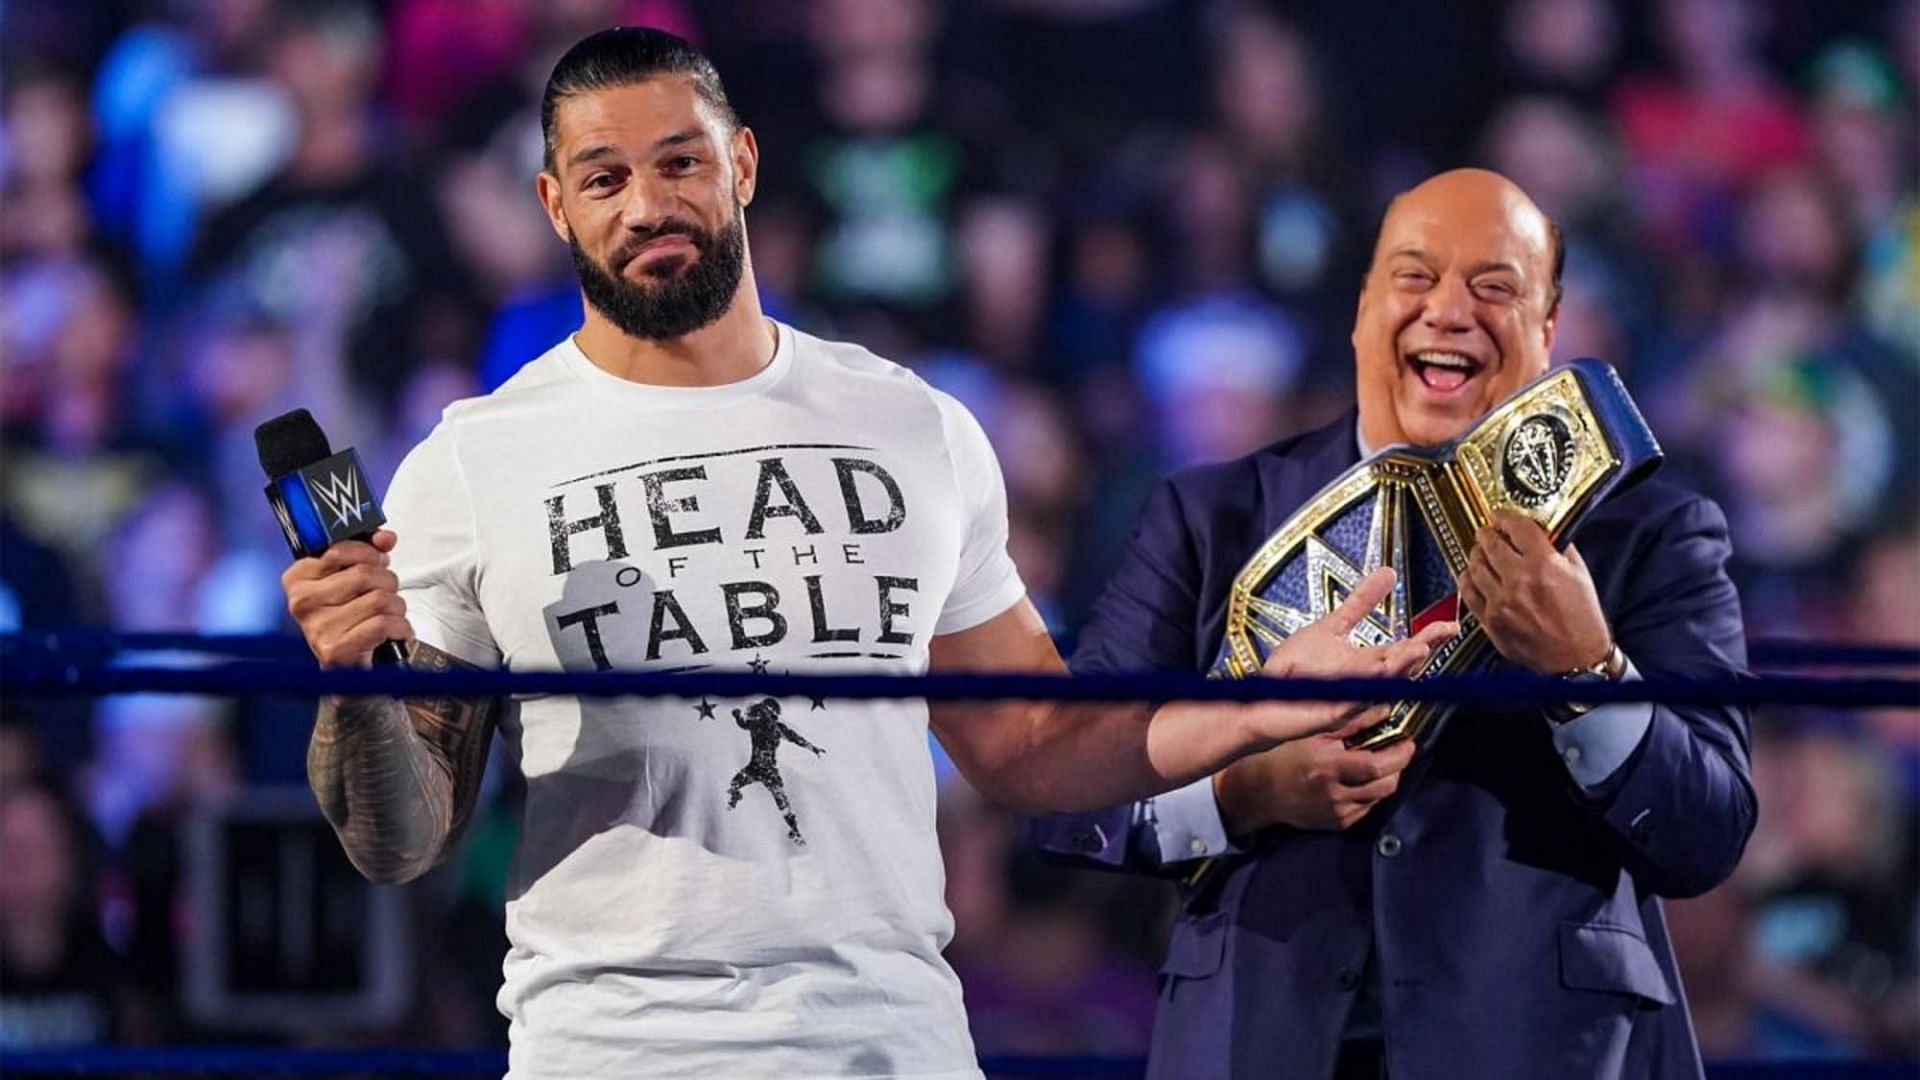 Roman Reigns may have another high-profile name to add to his list in the future